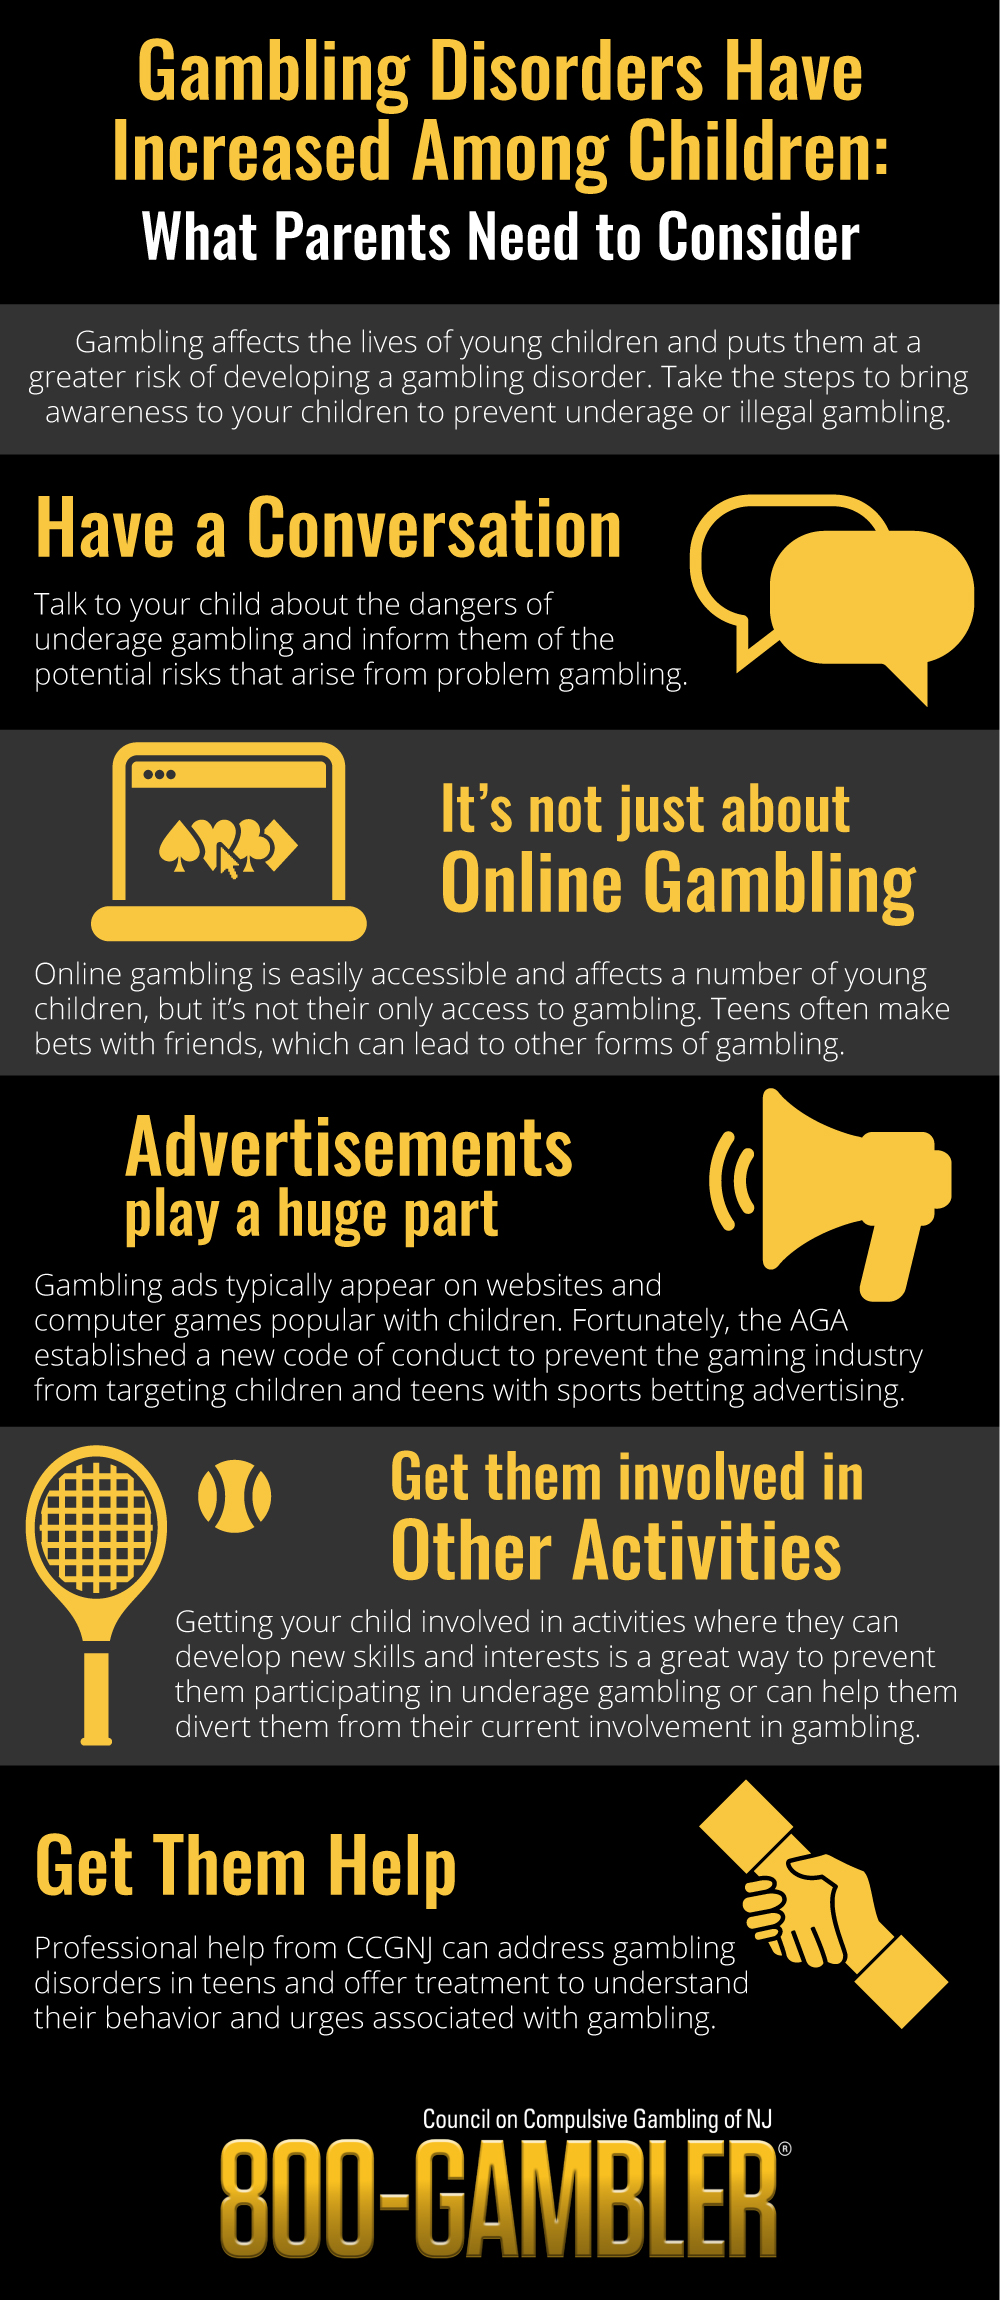 How can I prevent underage gambling?